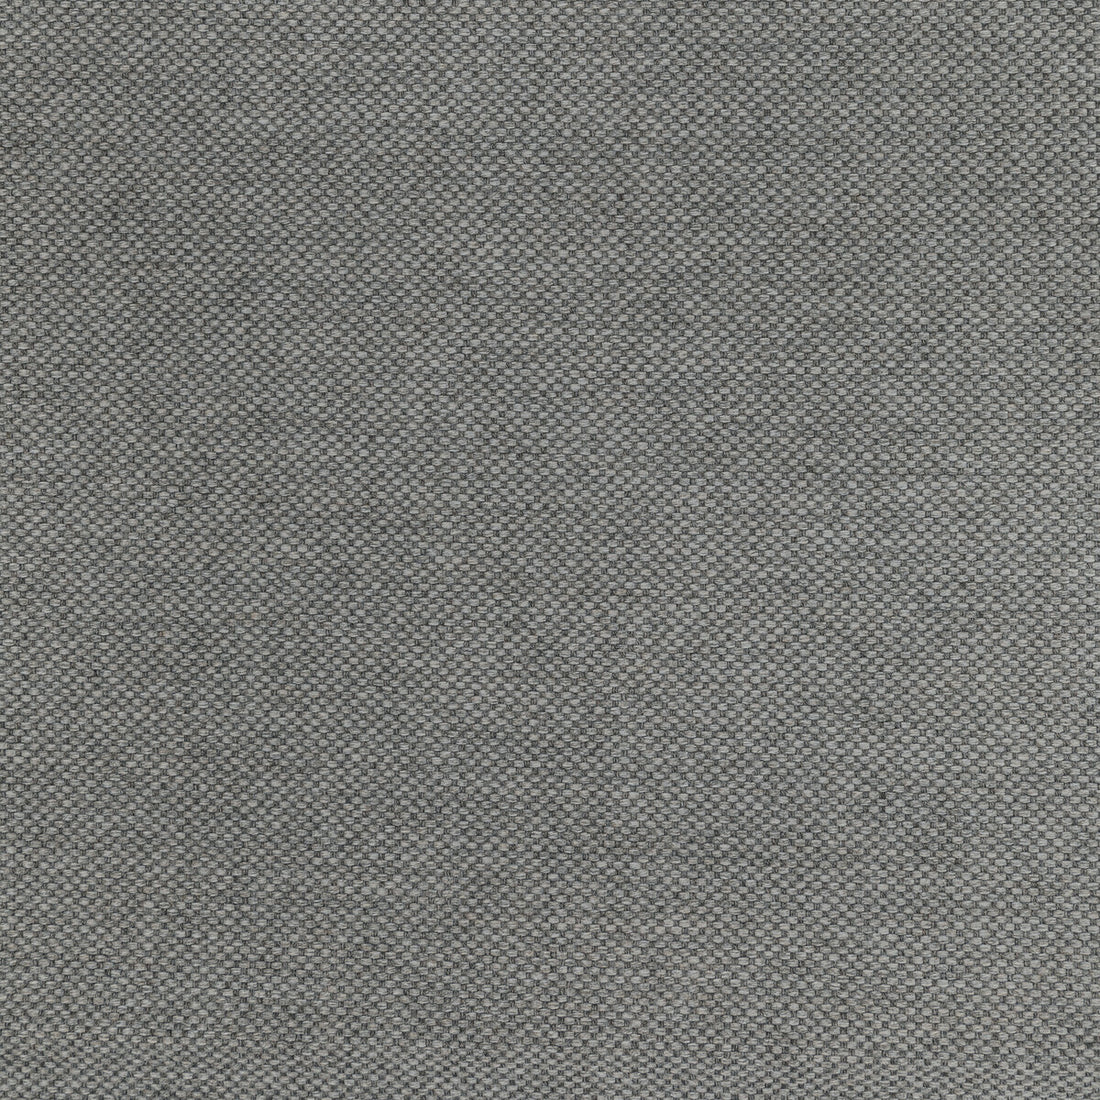 Kravet Basics fabric in 36826-21 color - pattern 36826.21.0 - by Kravet Basics in the Indoor / Outdoor collection